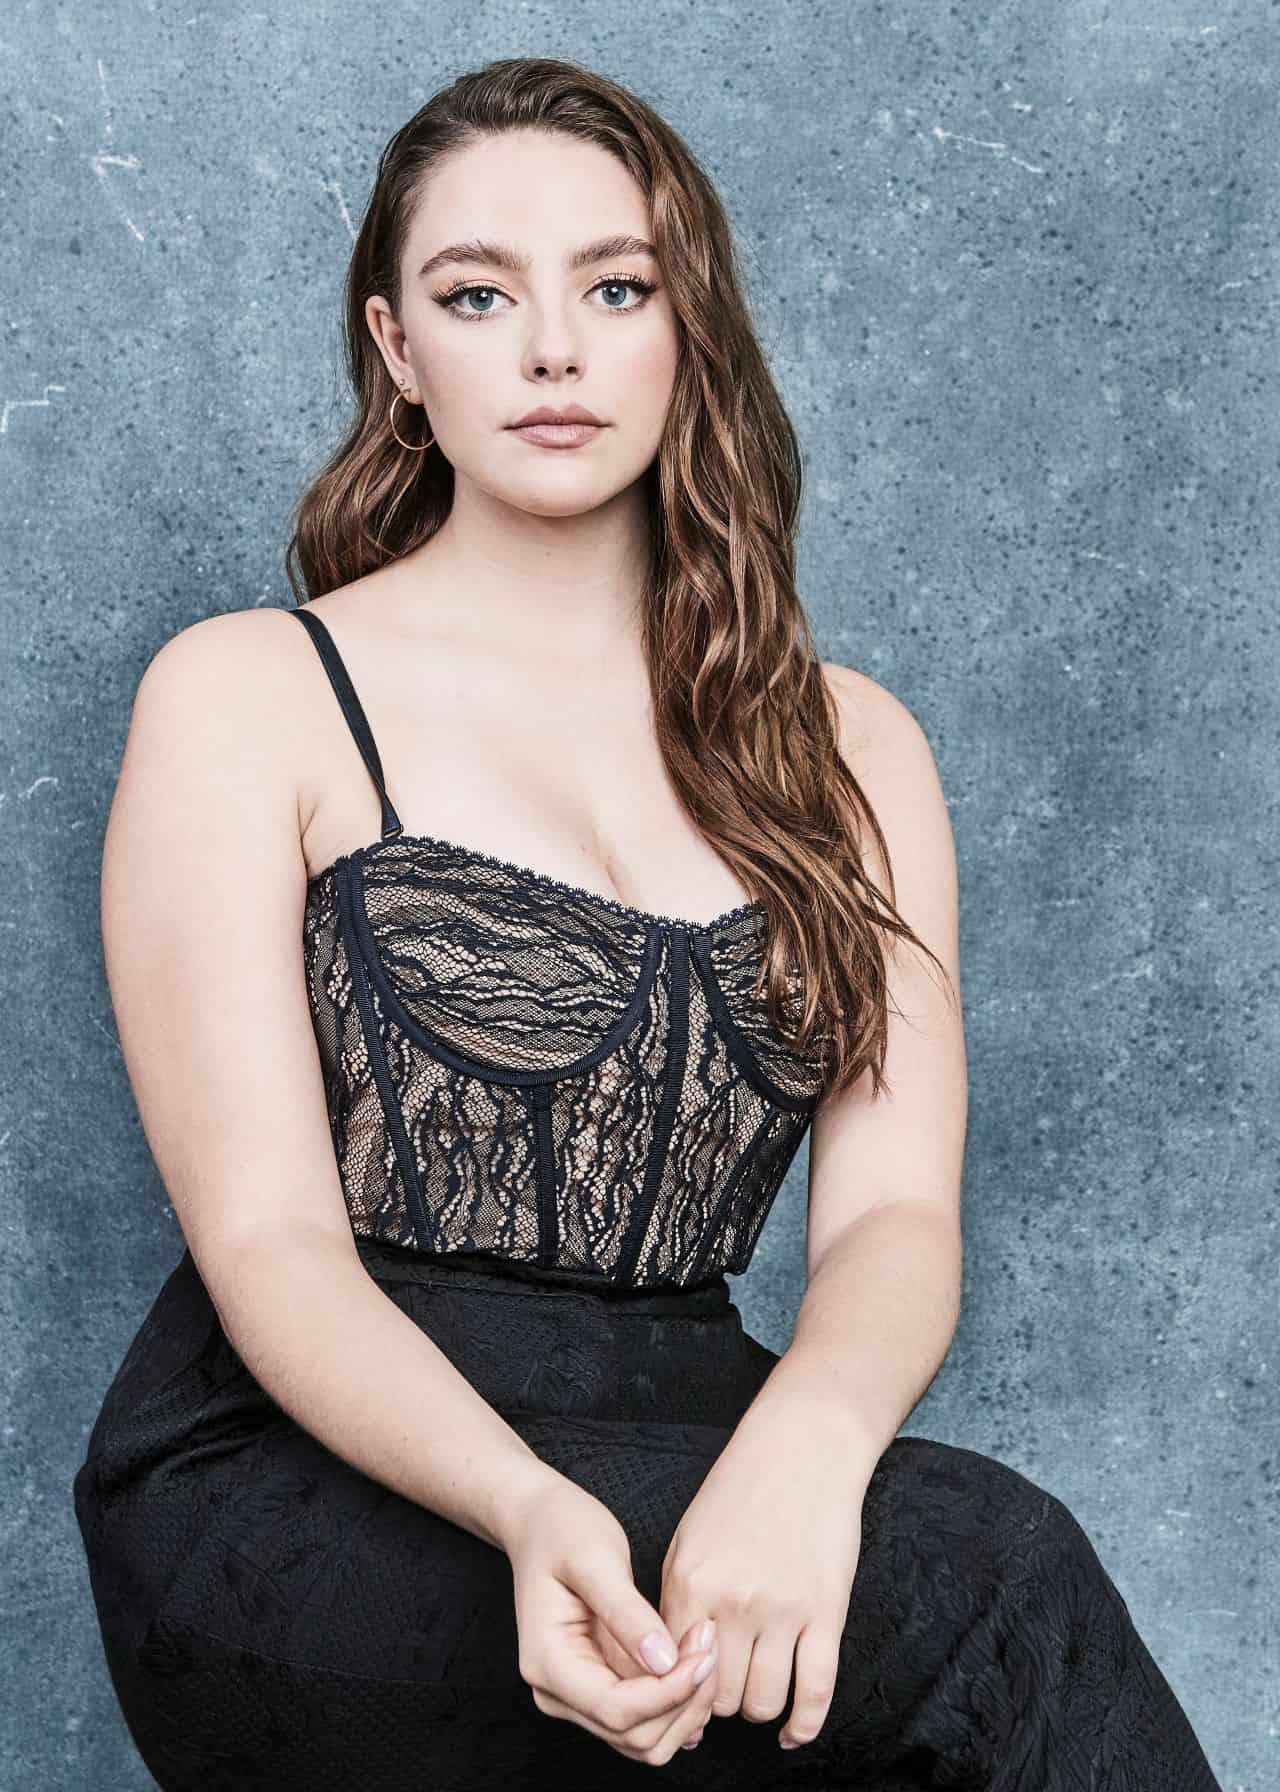 Danielle Rose Russell Free pics, videos & biography